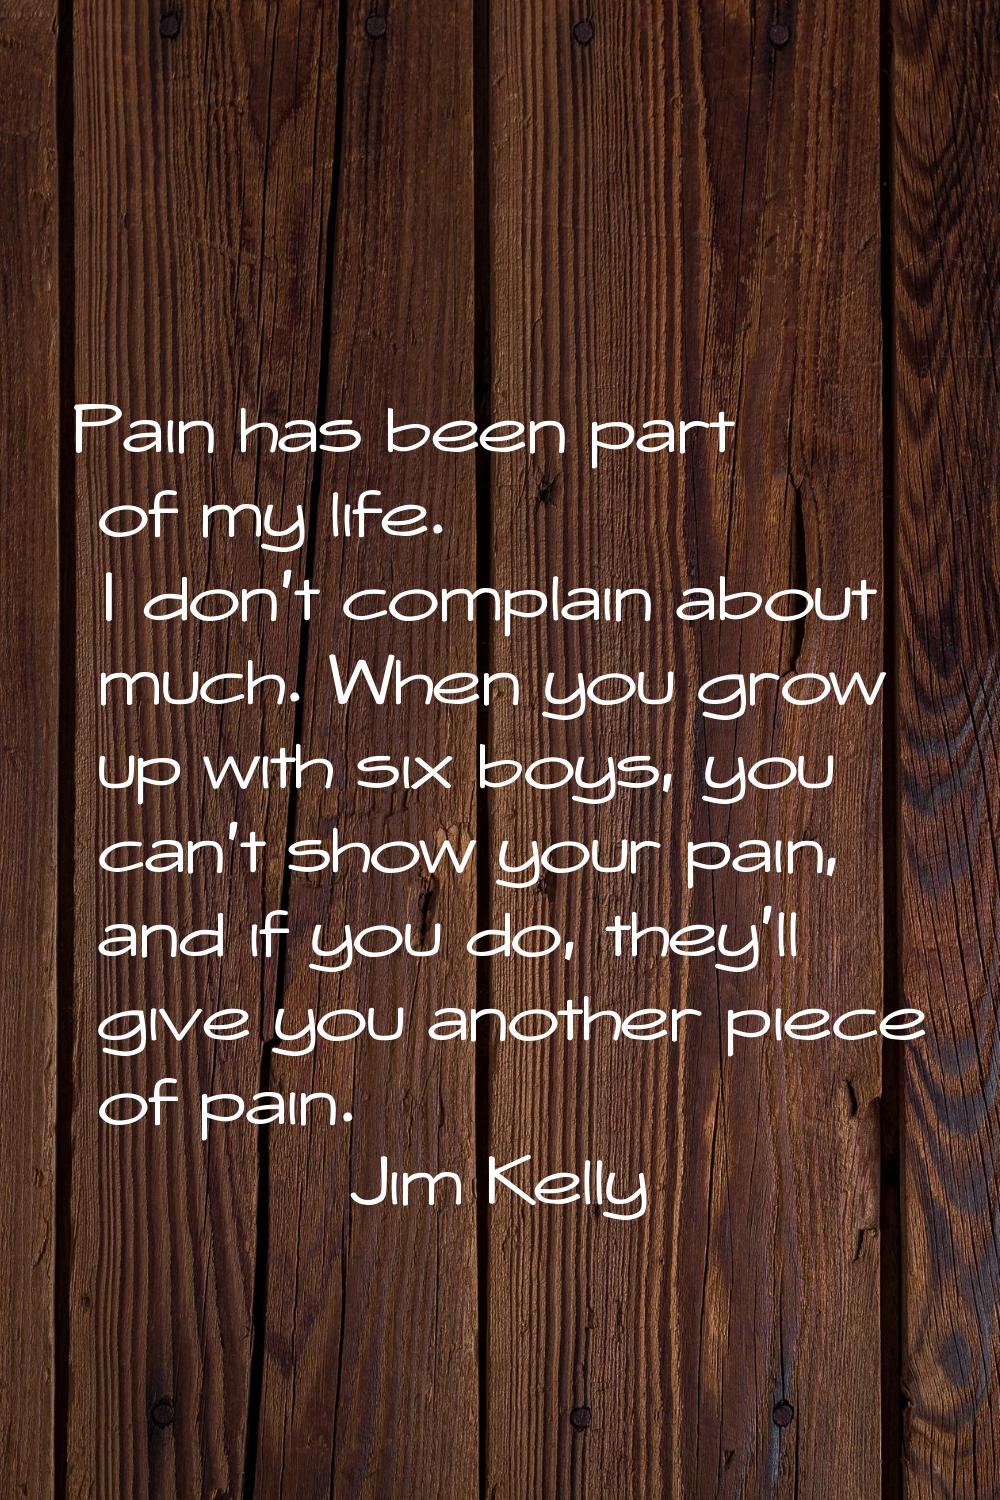 Pain has been part of my life. I don't complain about much. When you grow up with six boys, you can